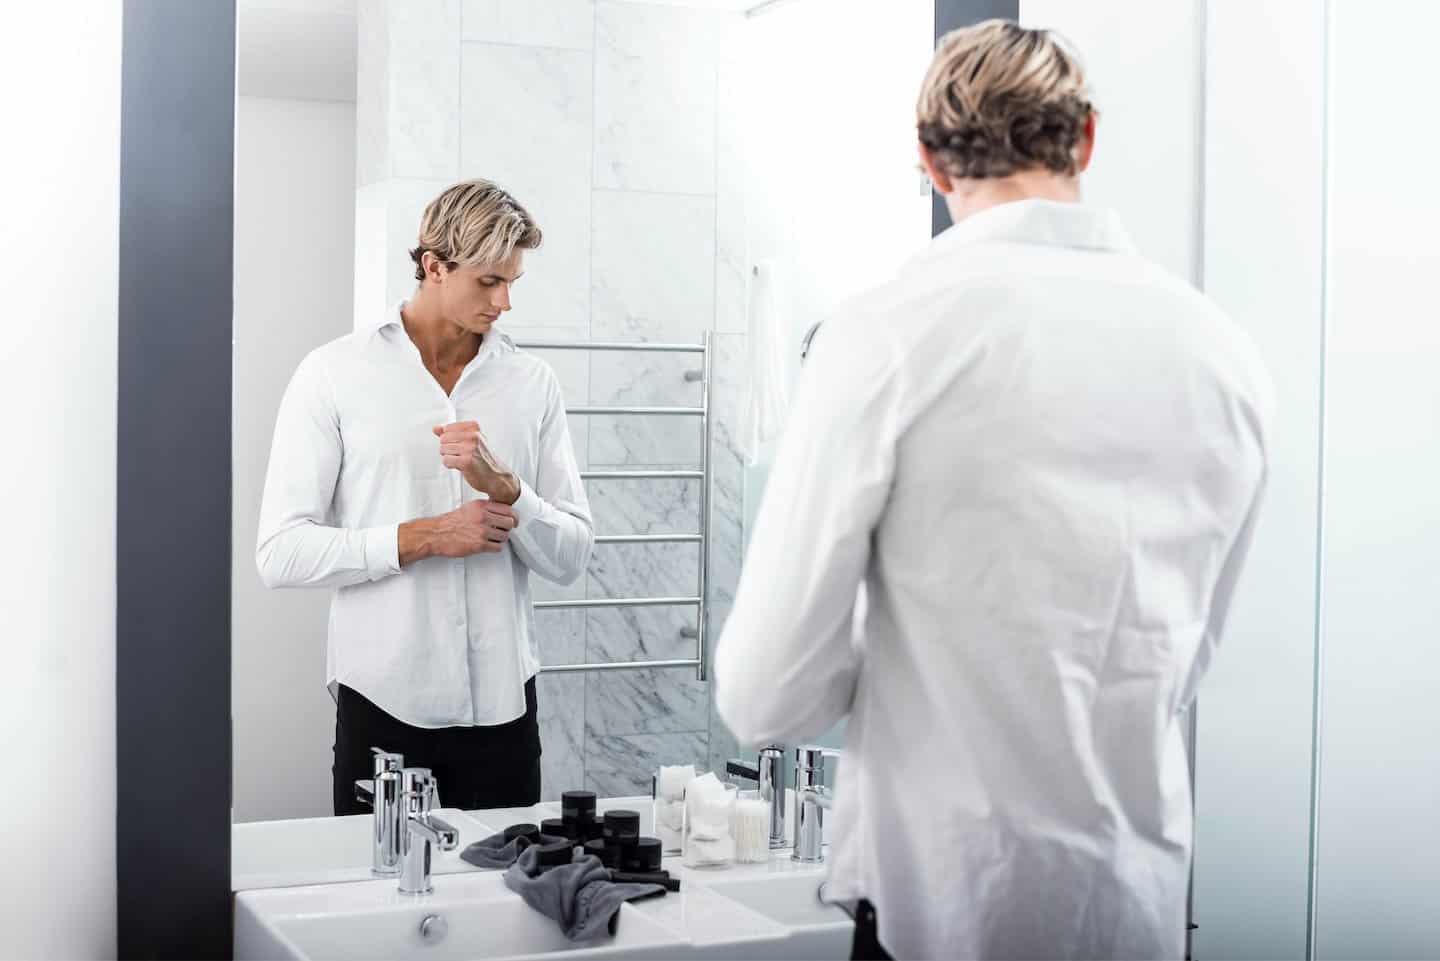 Man standing in front of mirror in white shirt buttoning cuffs